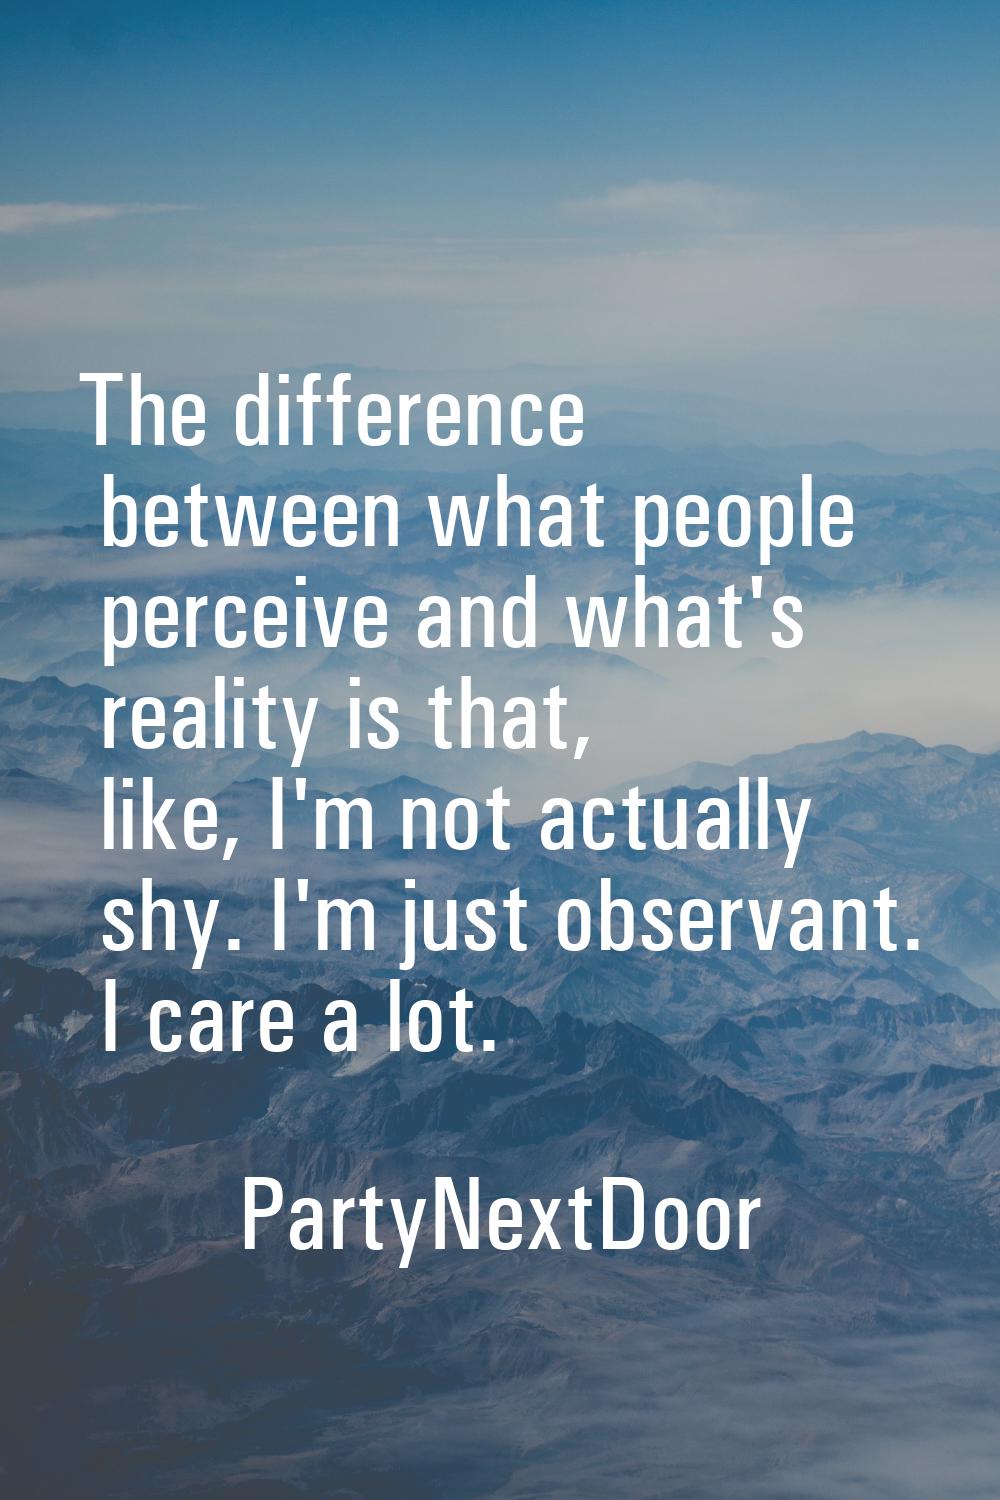 The difference between what people perceive and what's reality is that, like, I'm not actually shy.